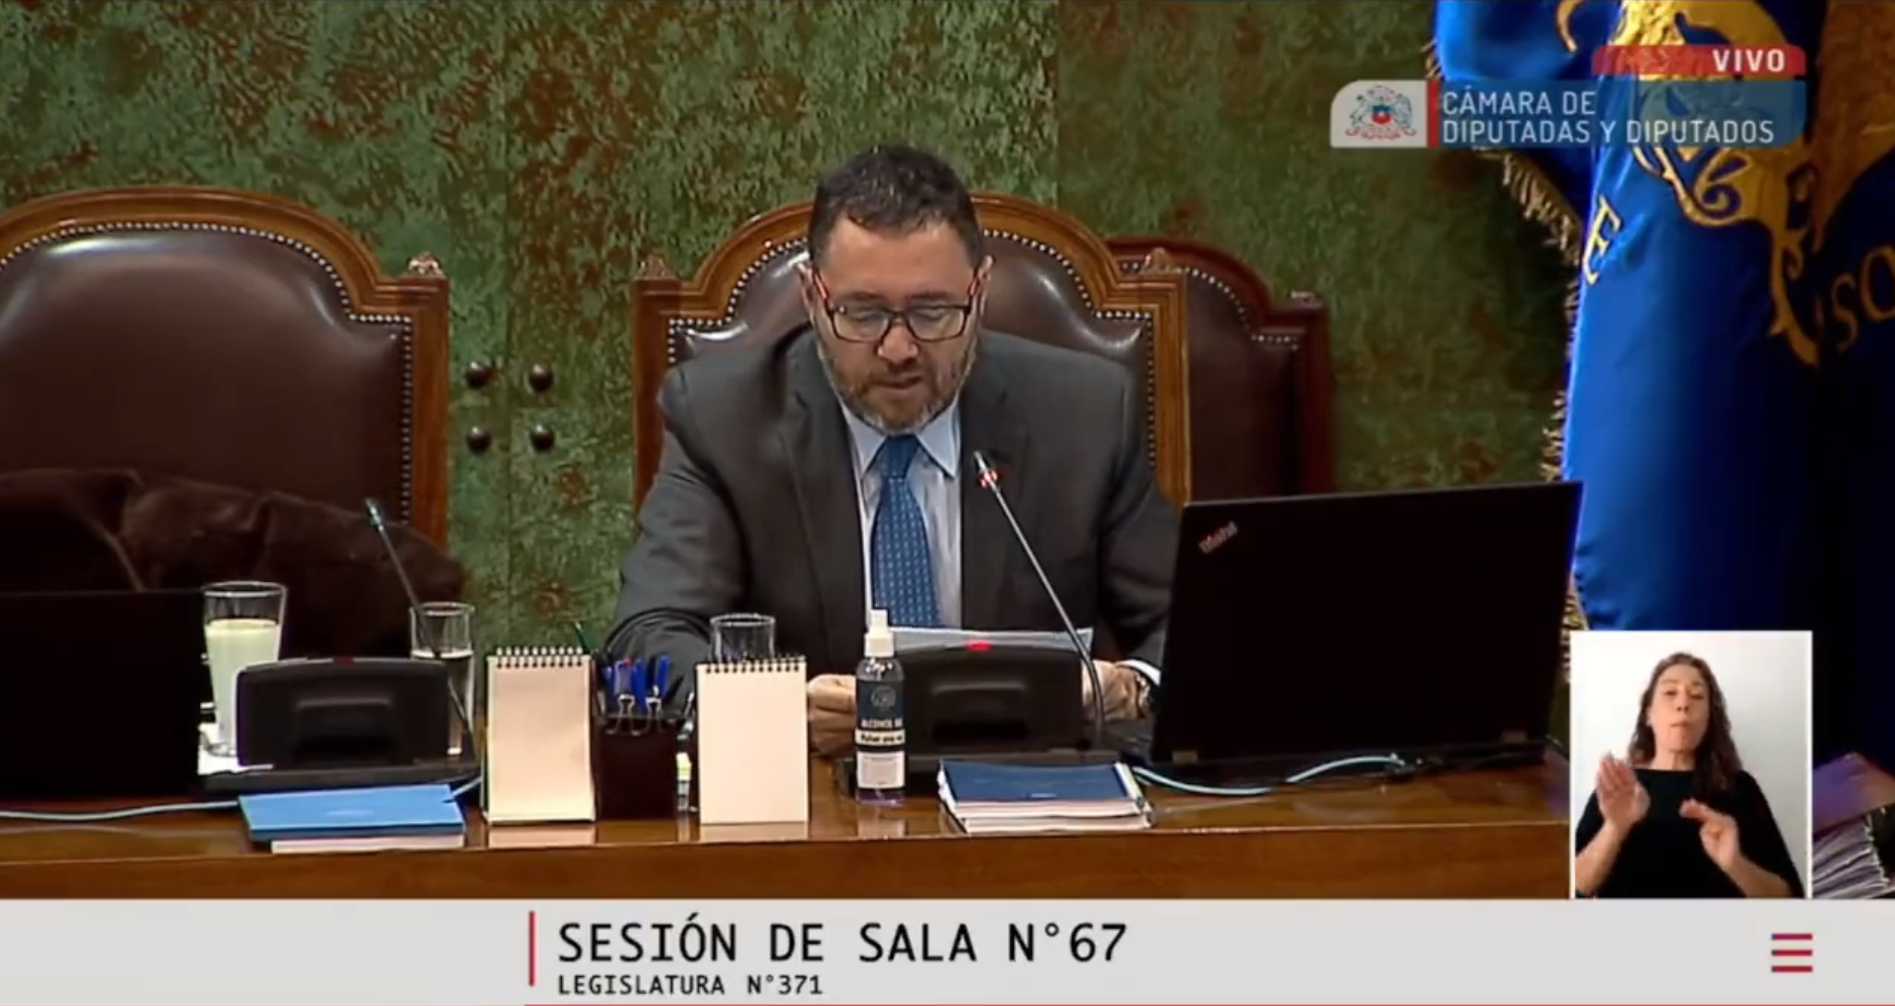 The Chilean Congress reads the resolution that declared the government of Salvador Allende “unconstitutional”